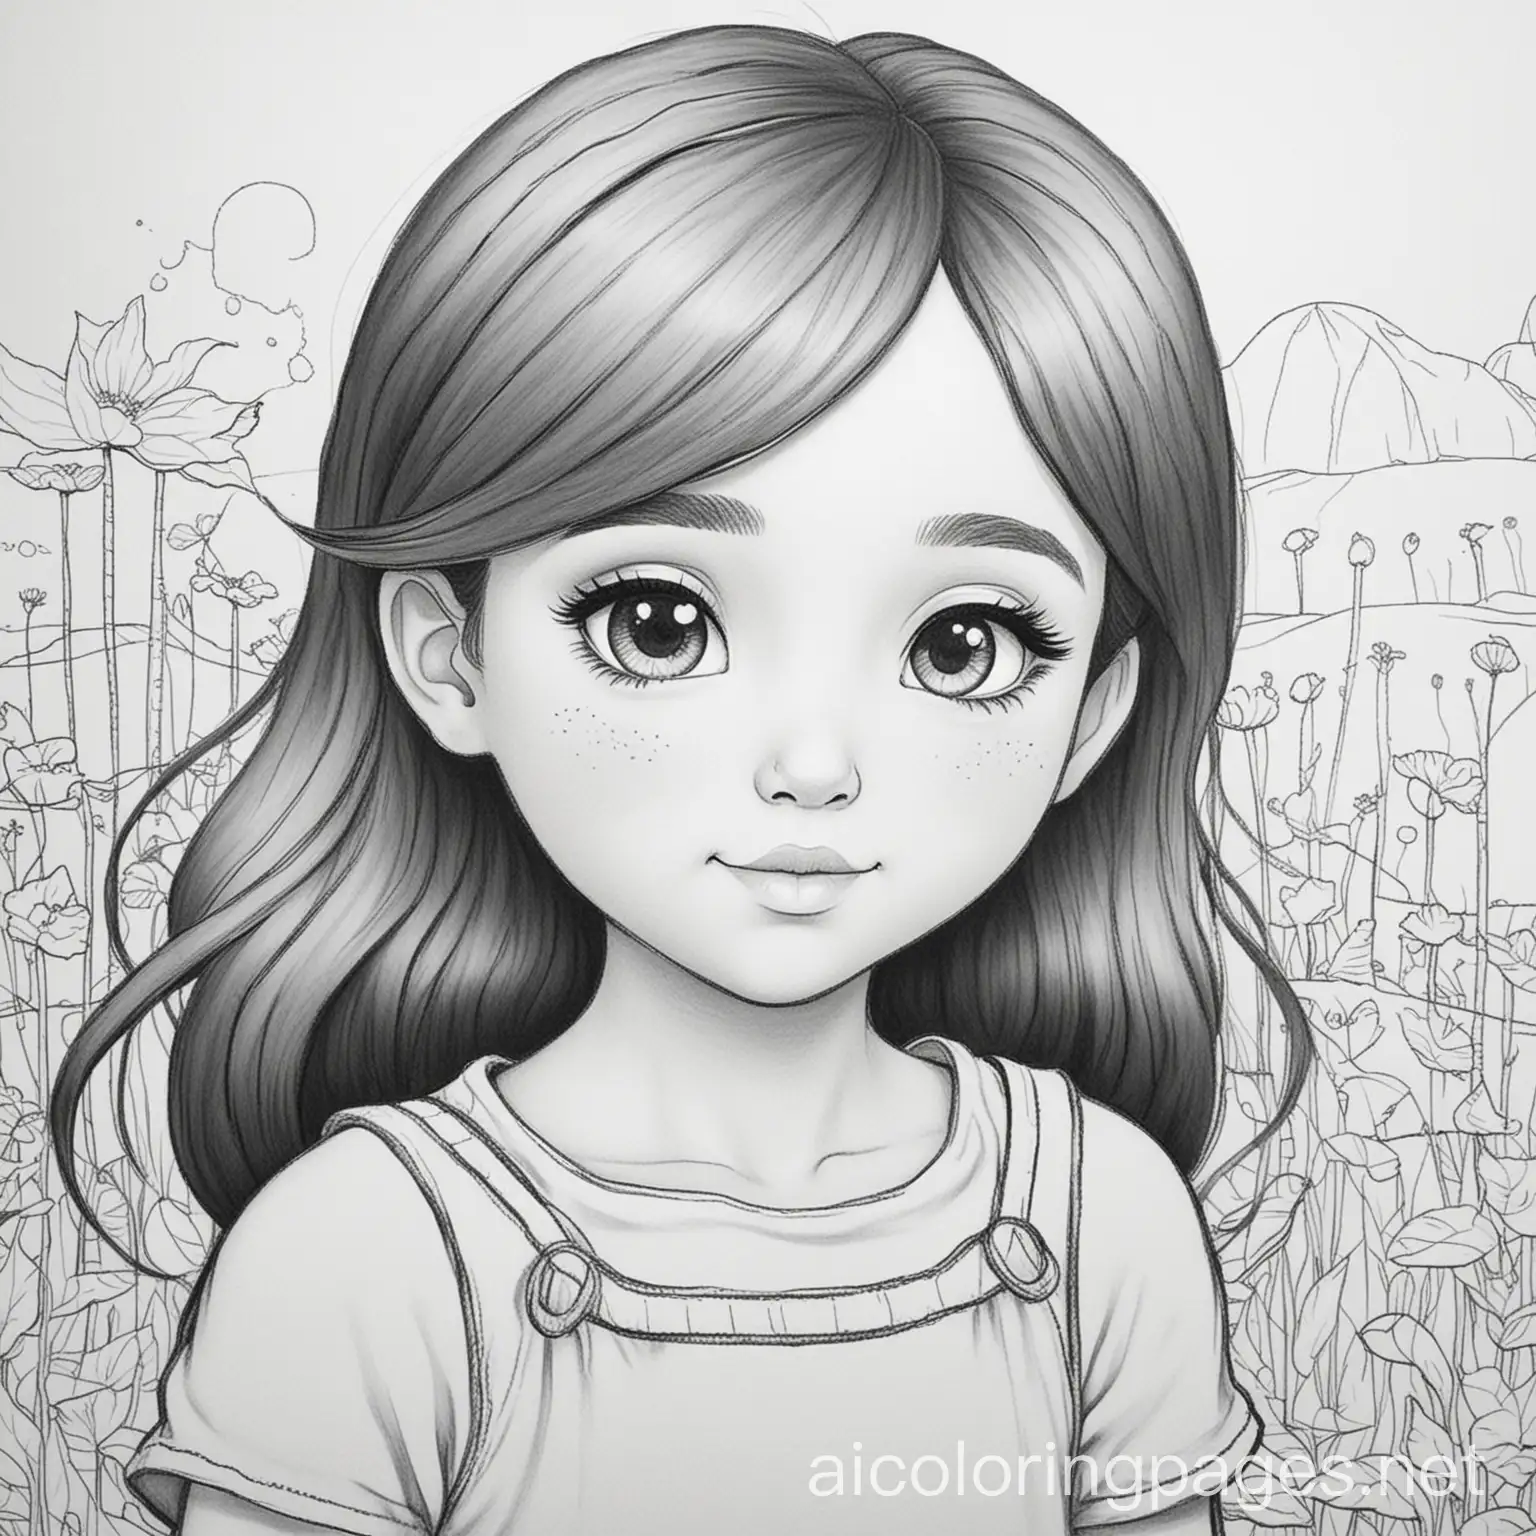 Luz Noceda, a human girl, finds herself in a magical world, Coloring Page, black and white, line art, white background, Simplicity, Ample White Space. The background of the coloring page is plain white to make it easy for young children to color within the lines. The outlines of all the subjects are easy to distinguish, making it simple for kids to color without too much difficulty, Coloring Page, black and white, line art, white background, Simplicity, Ample White Space. The background of the coloring page is plain white to make it easy for young children to color within the lines. The outlines of all the subjects are easy to distinguish, making it simple for kids to color without too much difficulty